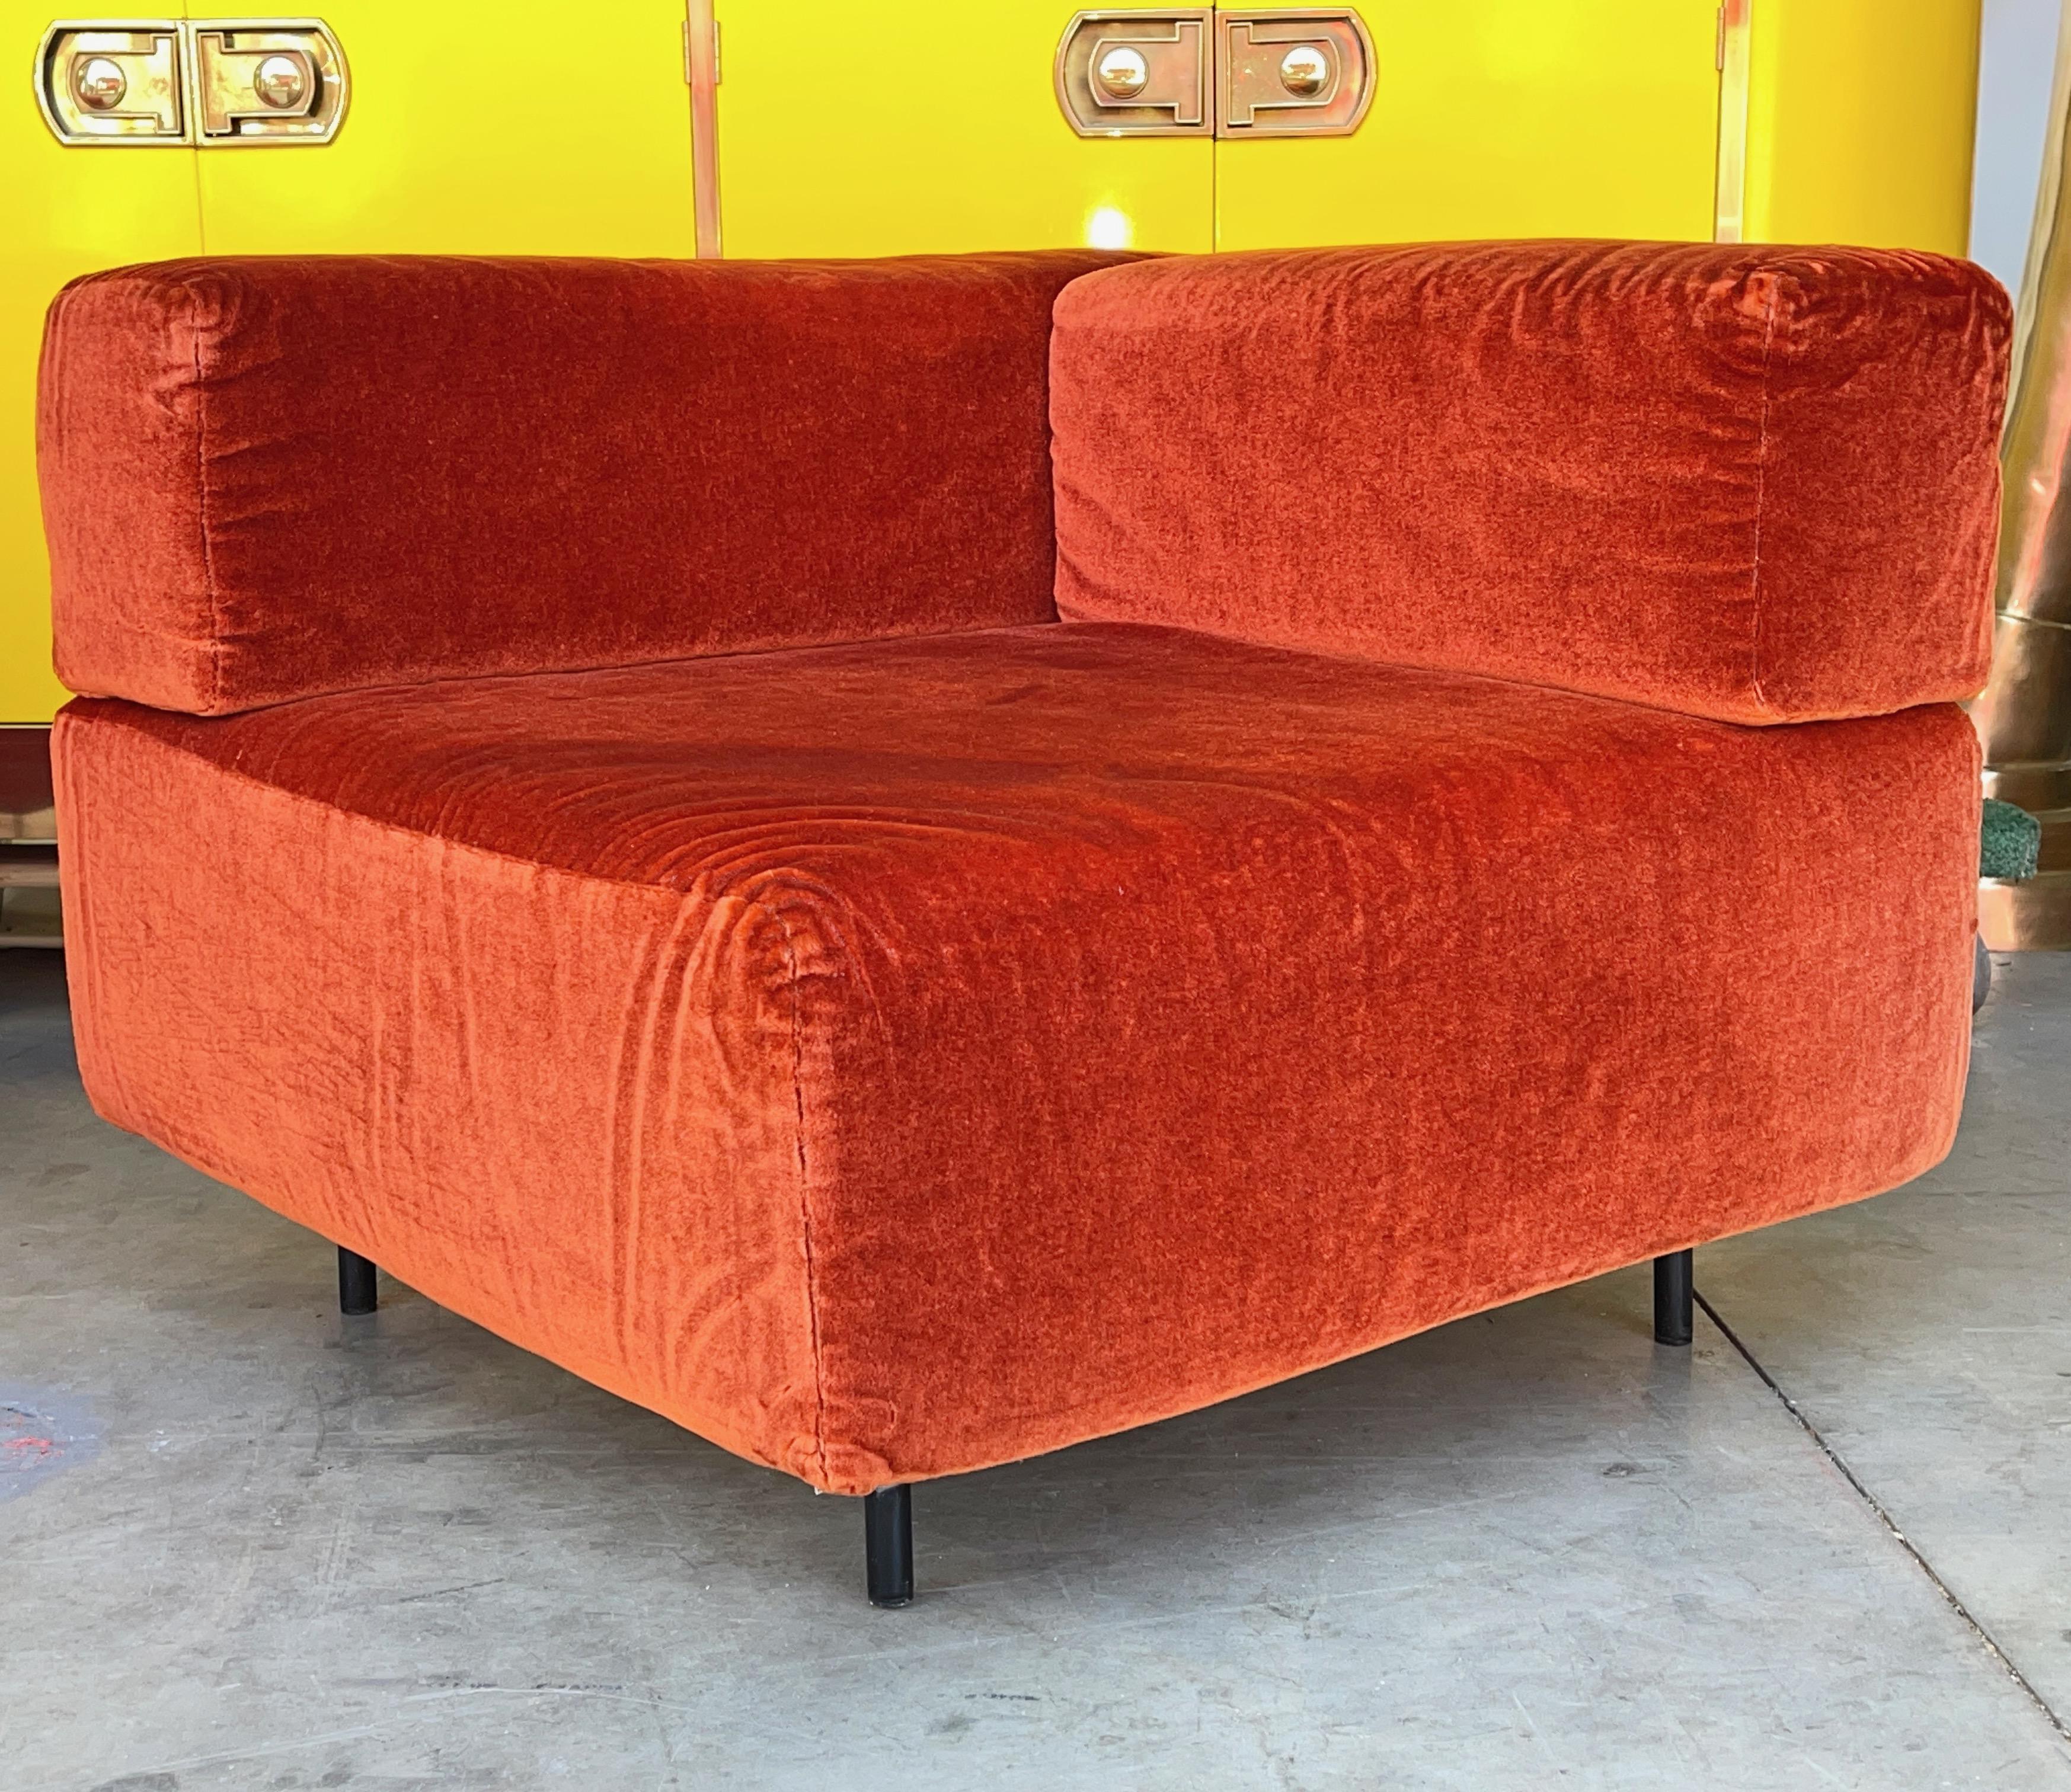 Original corner segment from Harvey Probber's Cubo sectional seating group.
Original plush velour covers unzip to be removed for cleaning.
Stainless steel tubular legs extend up through the seat and secure the two backrests in place.
The legs